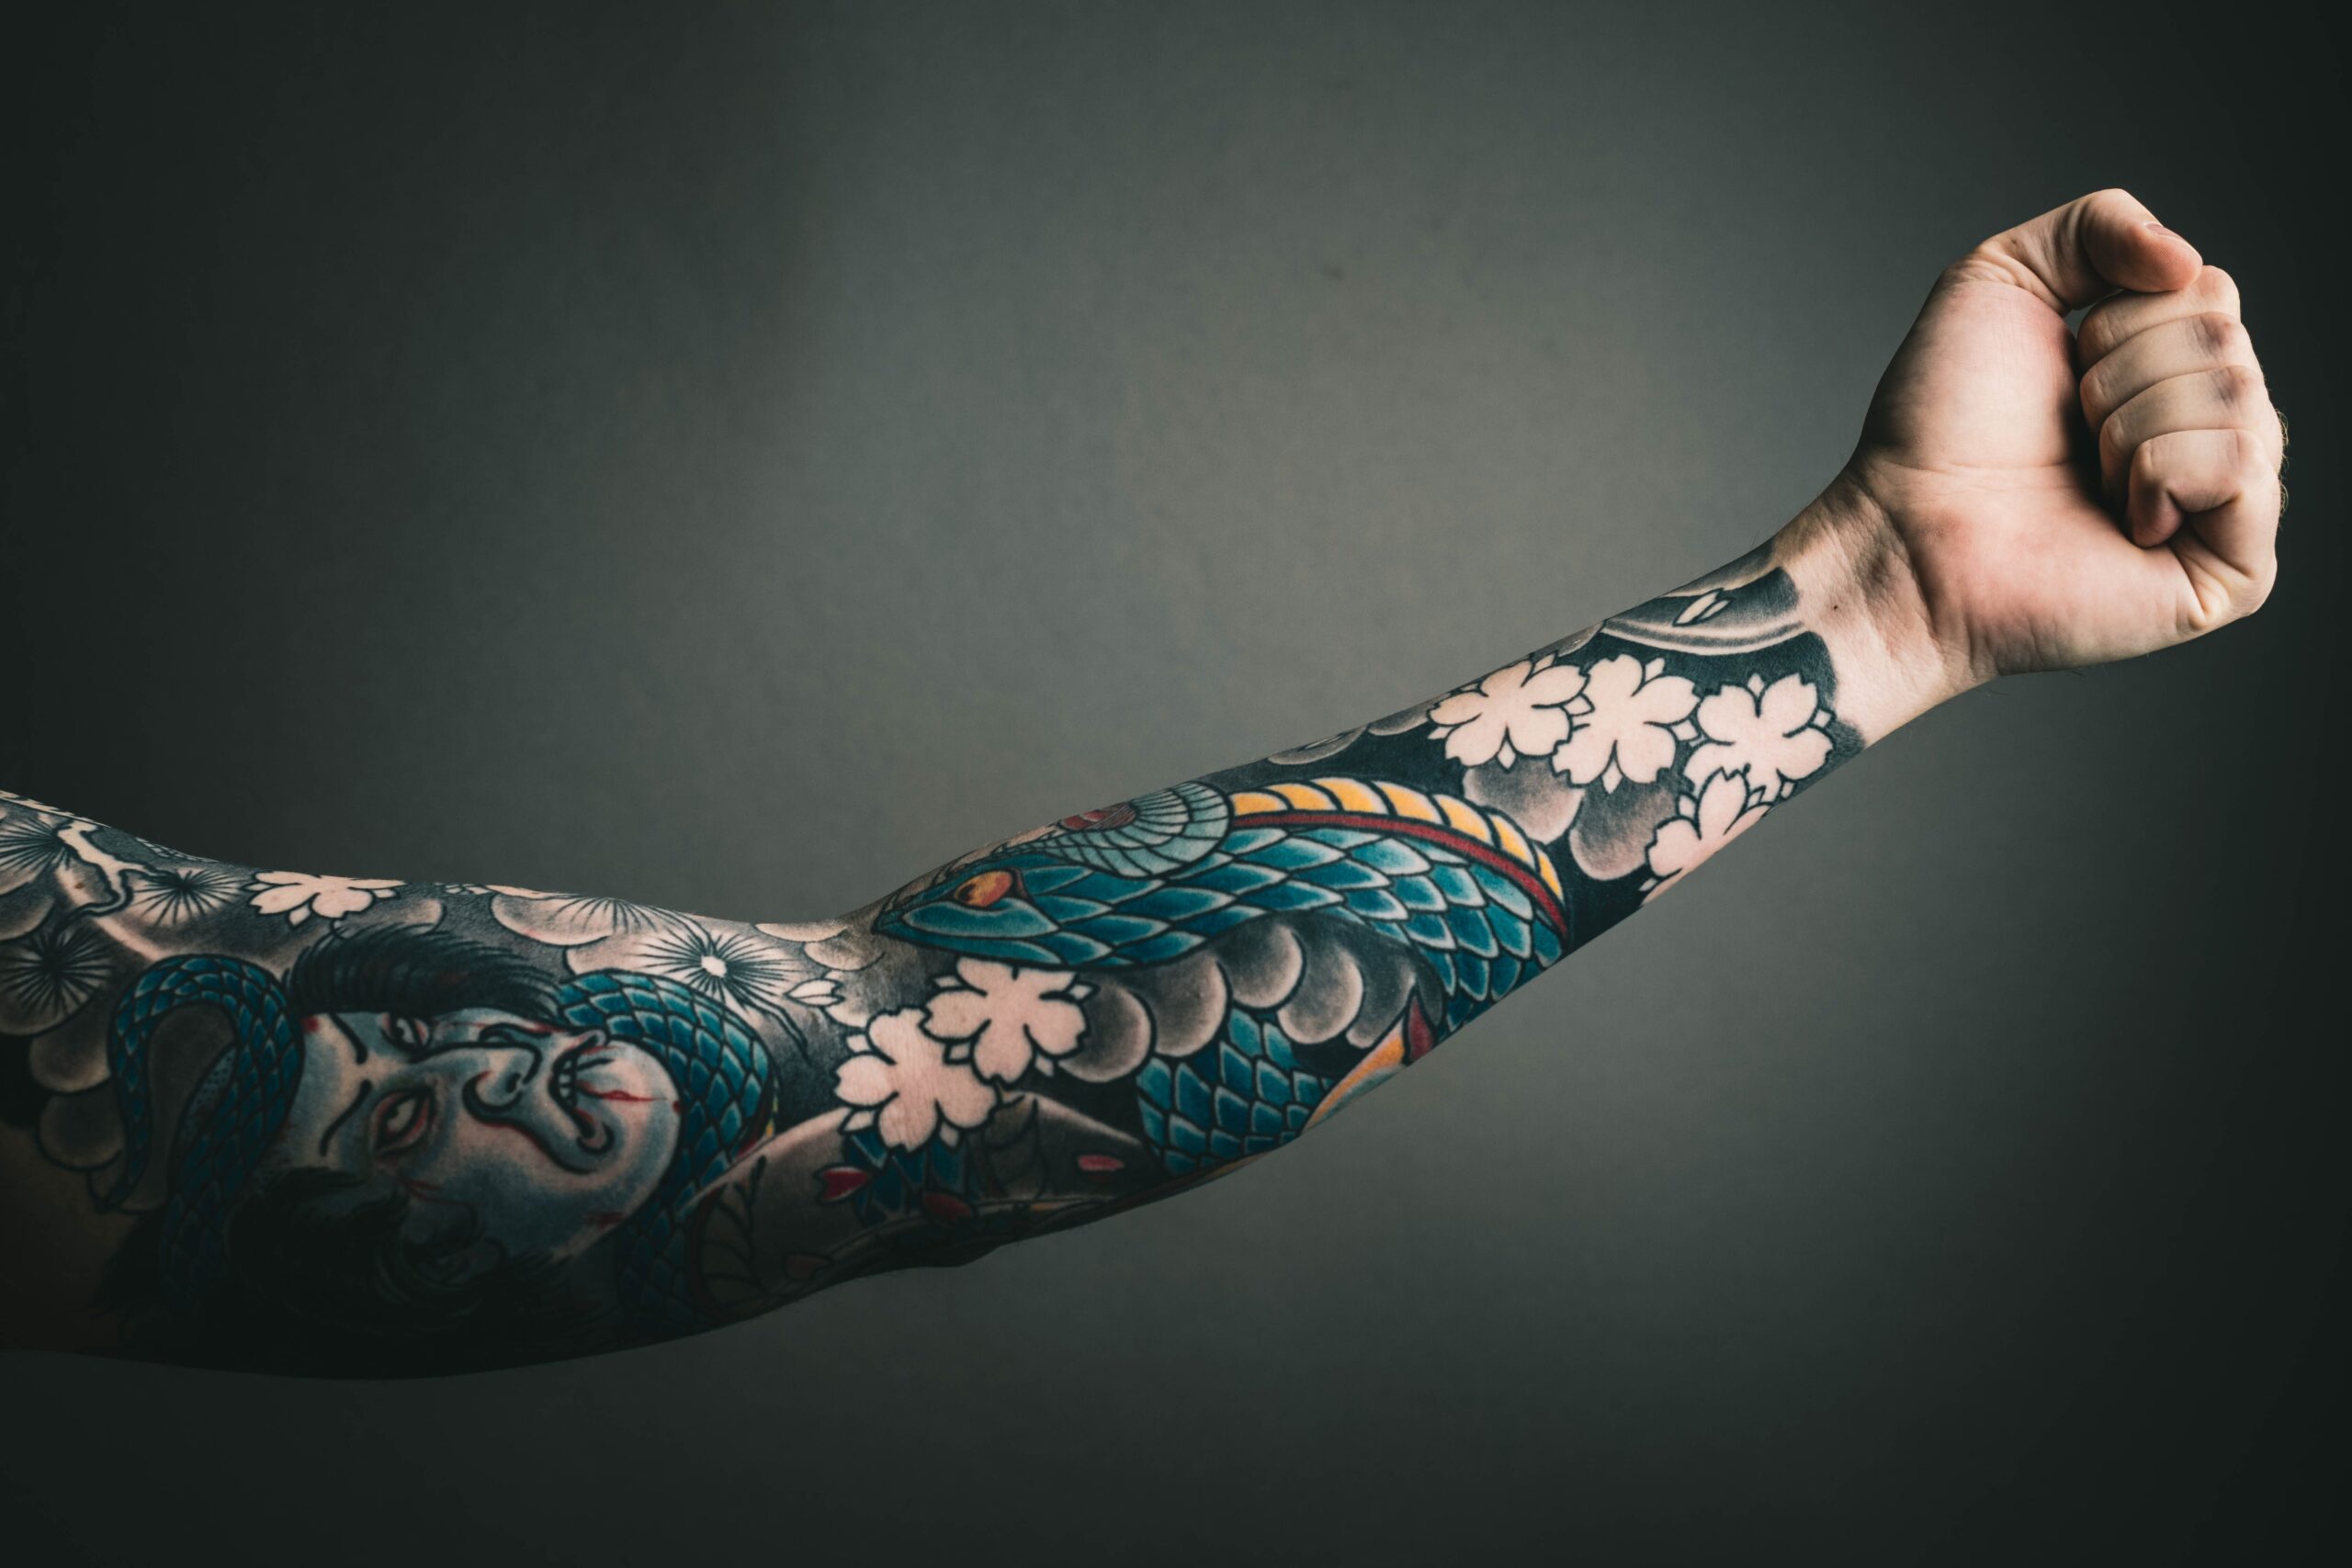 How Much Does Tattoo Removal Hurt?